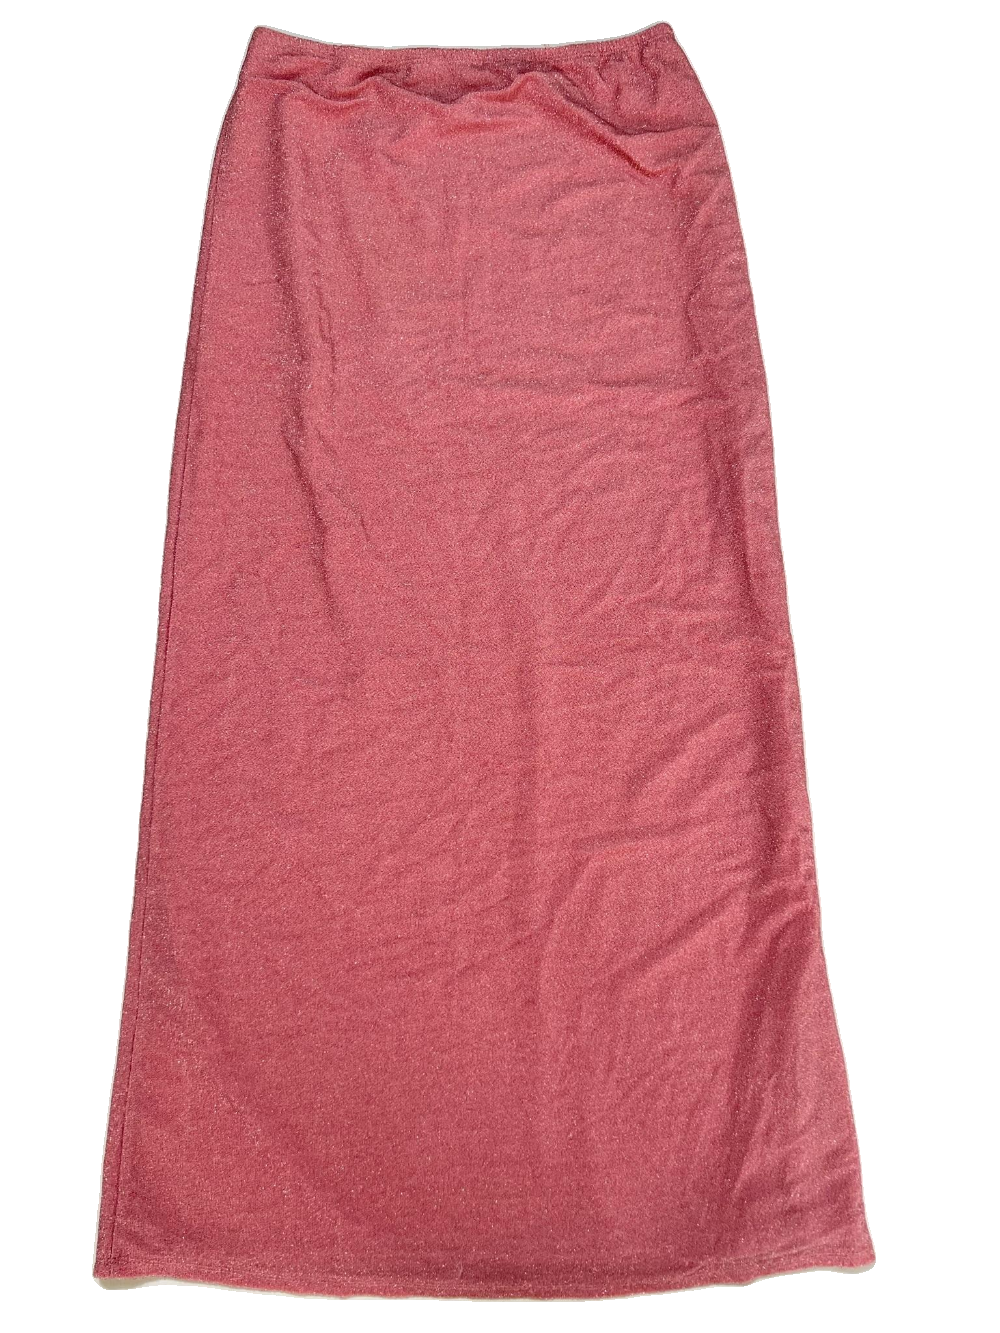 Princess Polly- Pink "Harriette Maxi" Skirt NEW WITH TAGS